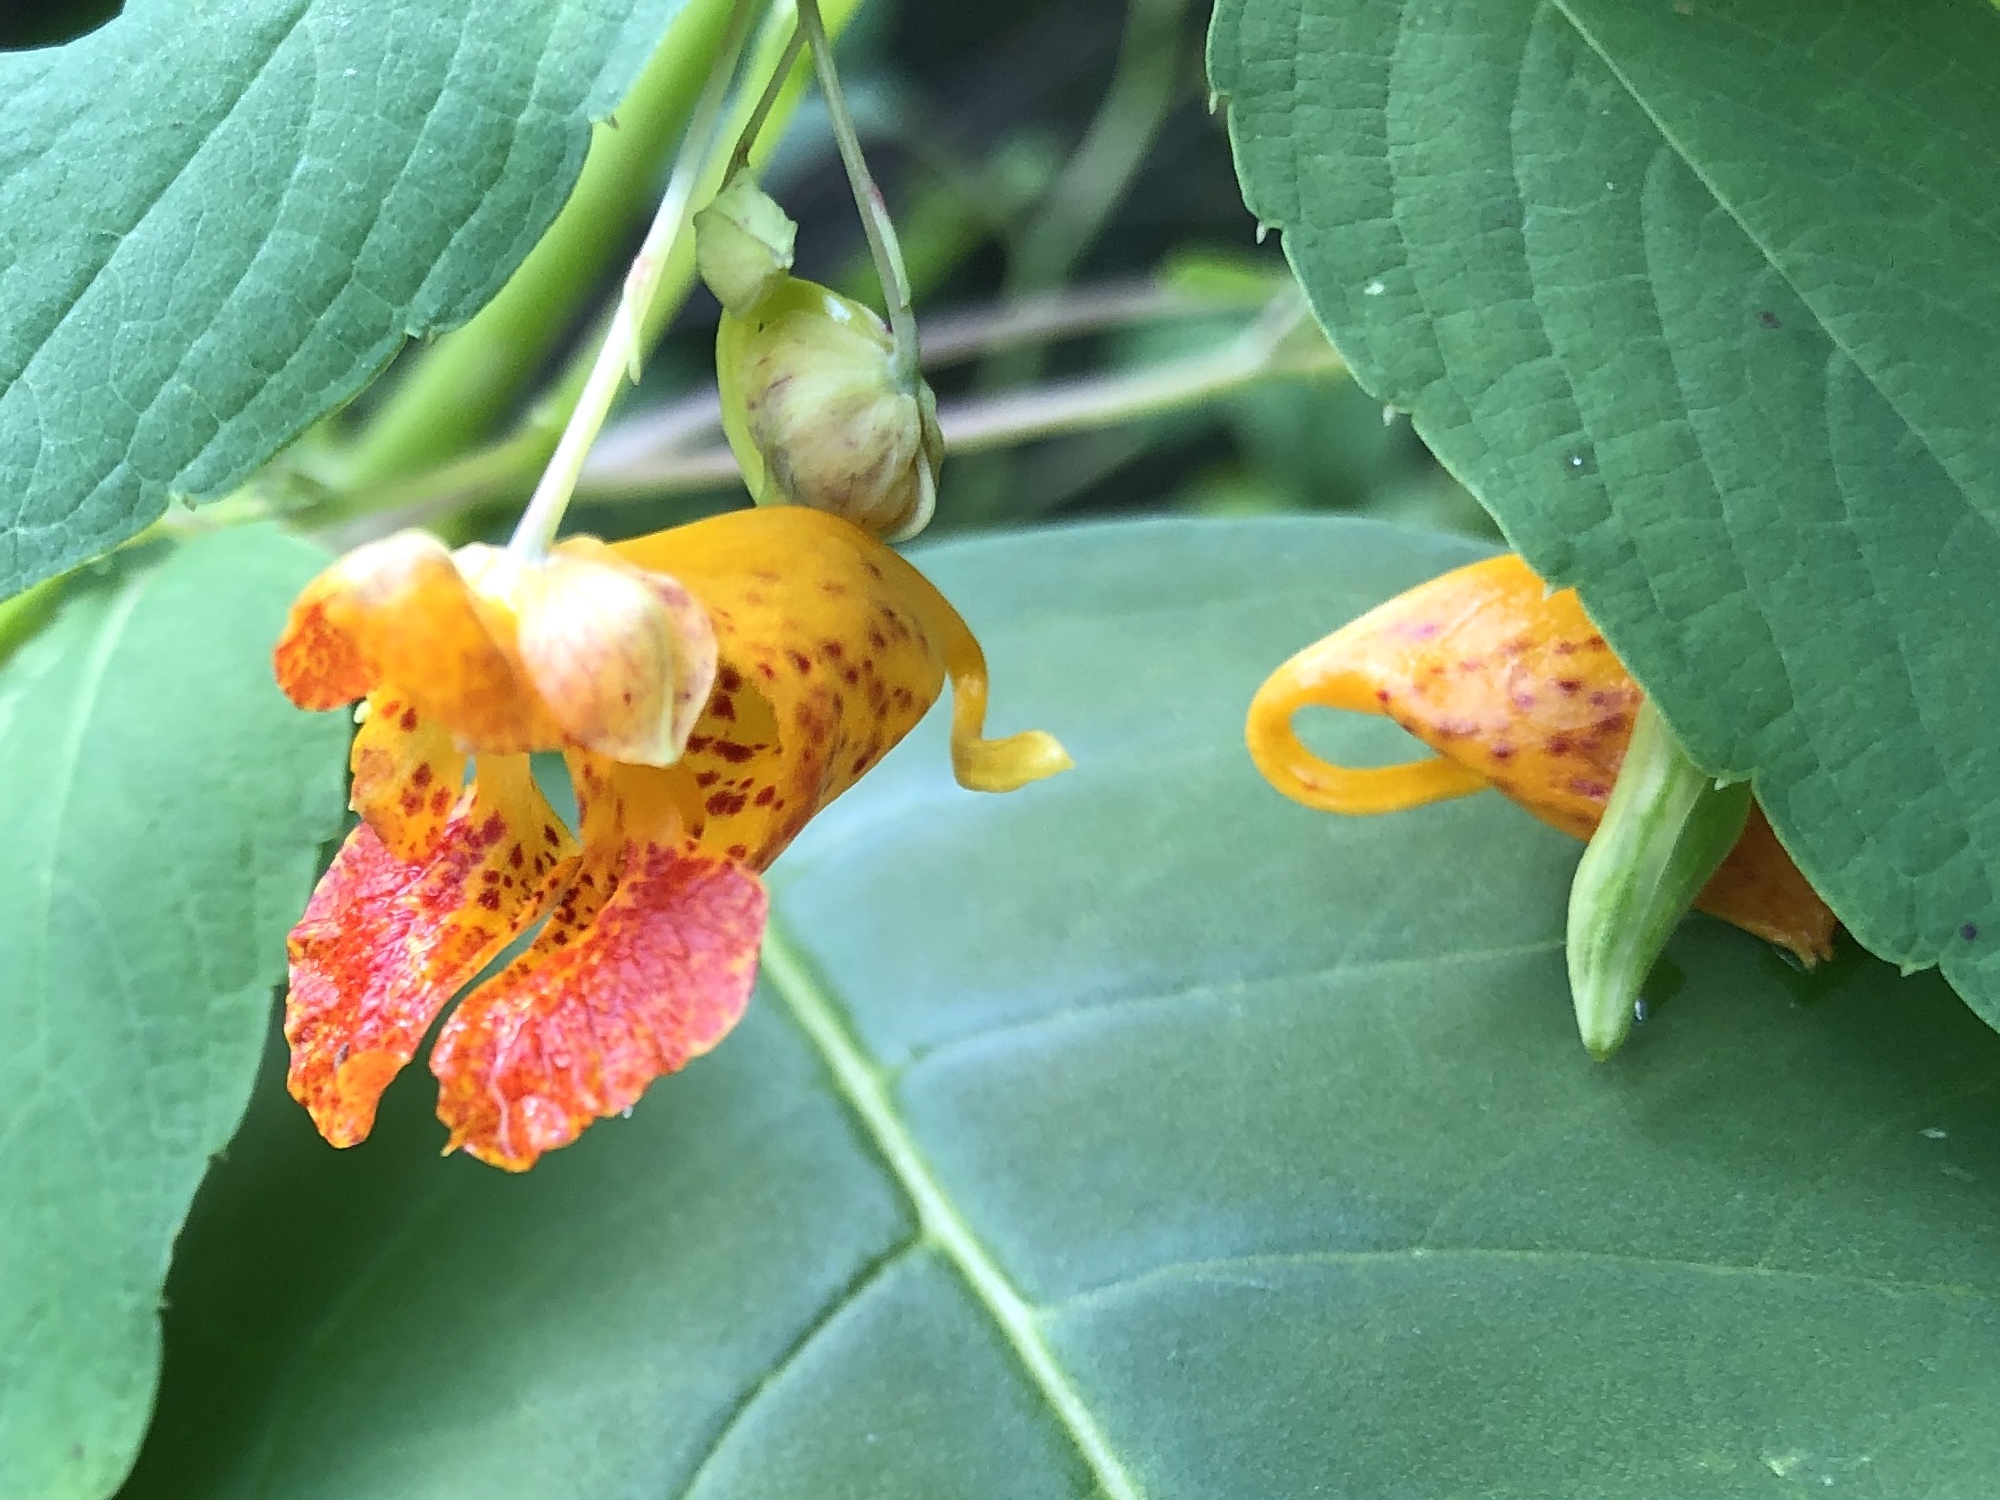 Spotted Jewelweed in Nakoma Park on August 18, 2019.